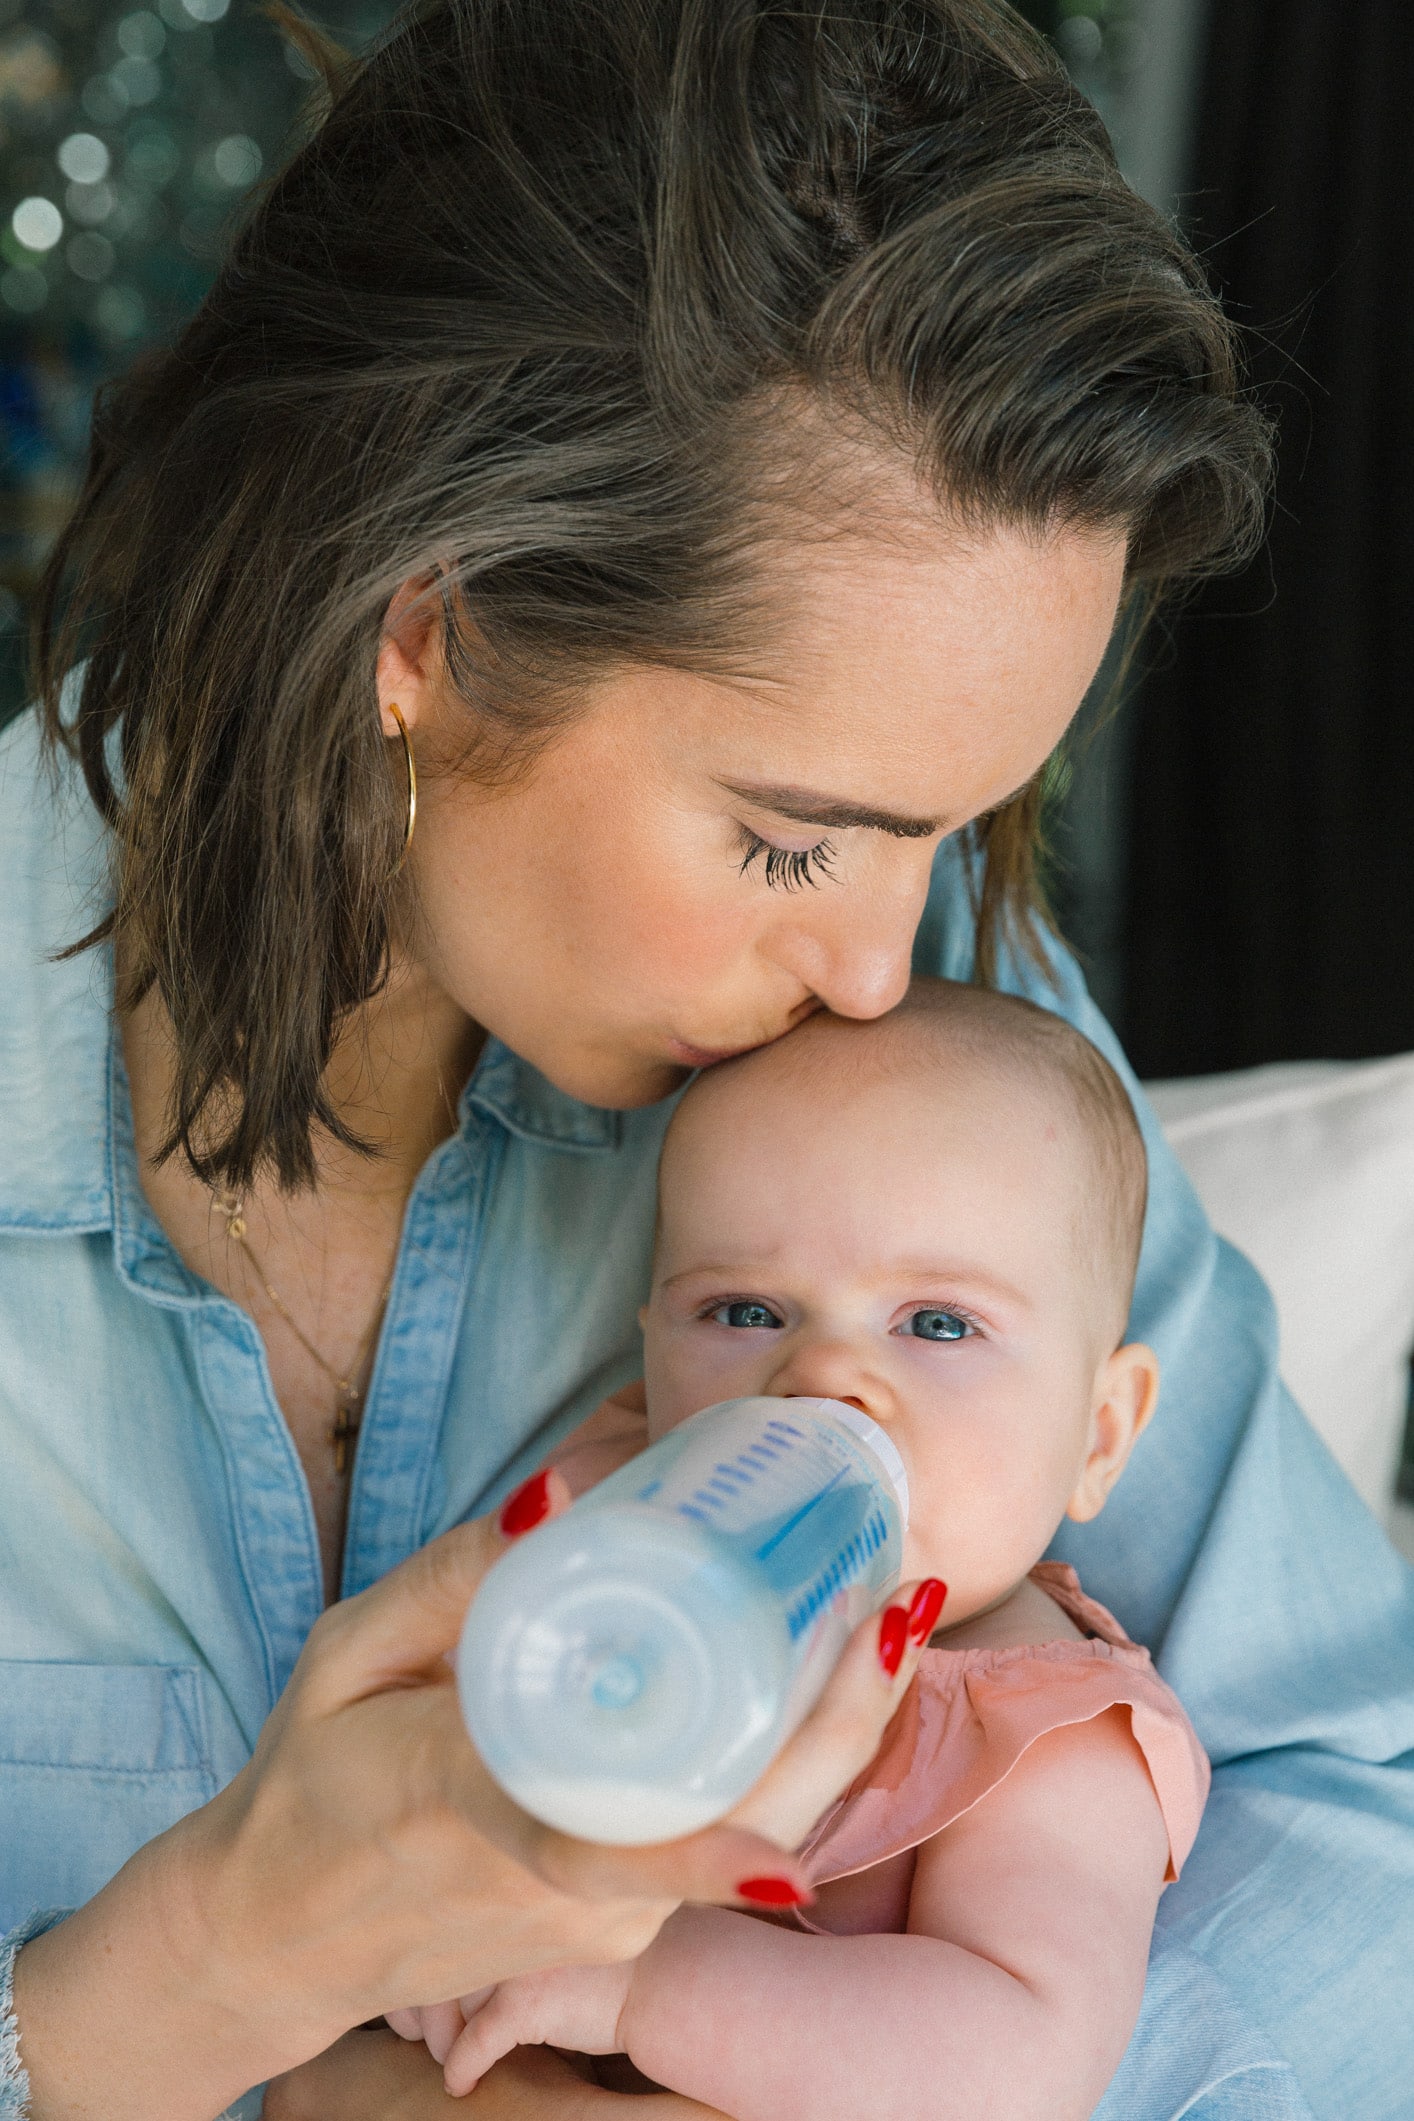 Louise Roe Tips On How To Stop Breastfeeding With Enfamil Formula